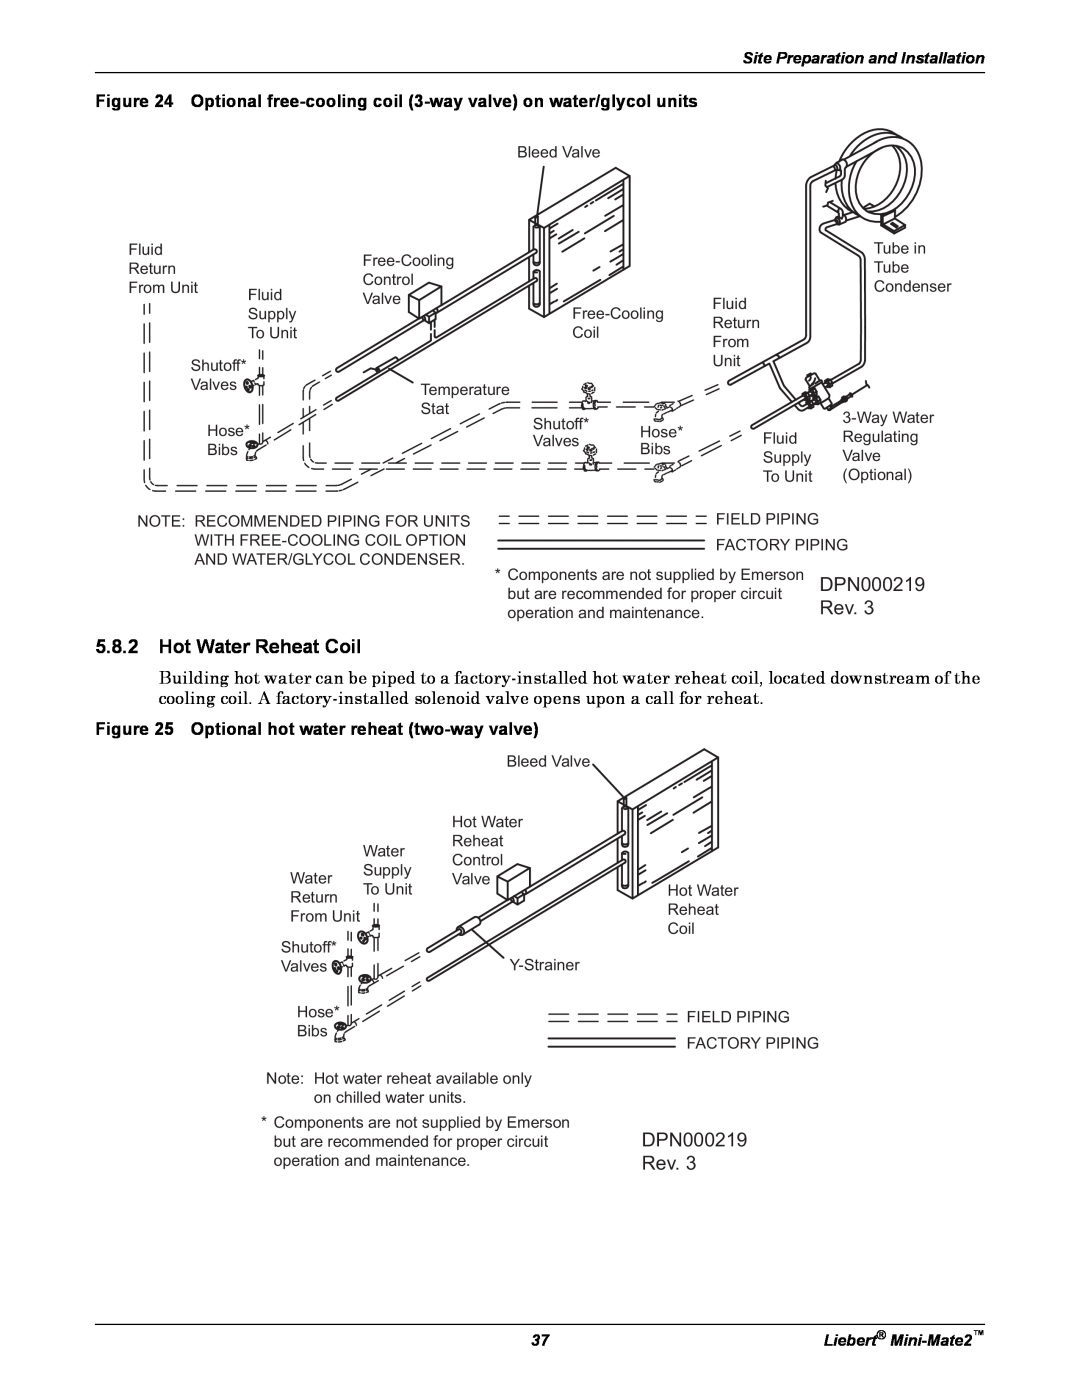 Emerson MINI-MATE2 user manual 5.8.2Hot Water Reheat Coil, DPN000219 Rev, Site Preparation and Installation 